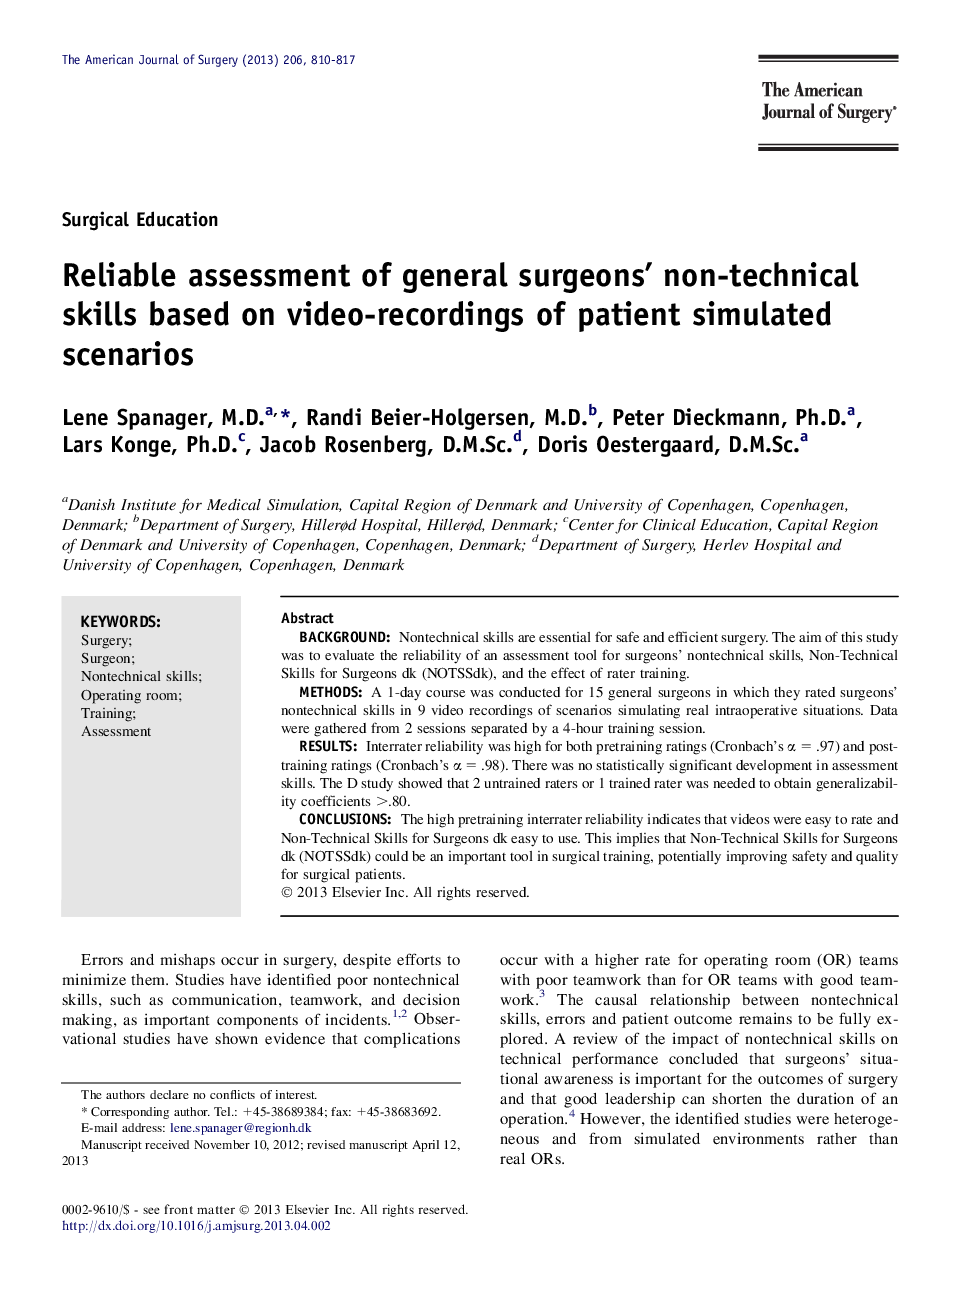 Reliable assessment of general surgeons' non-technical skills based on video-recordings of patient simulated scenarios 